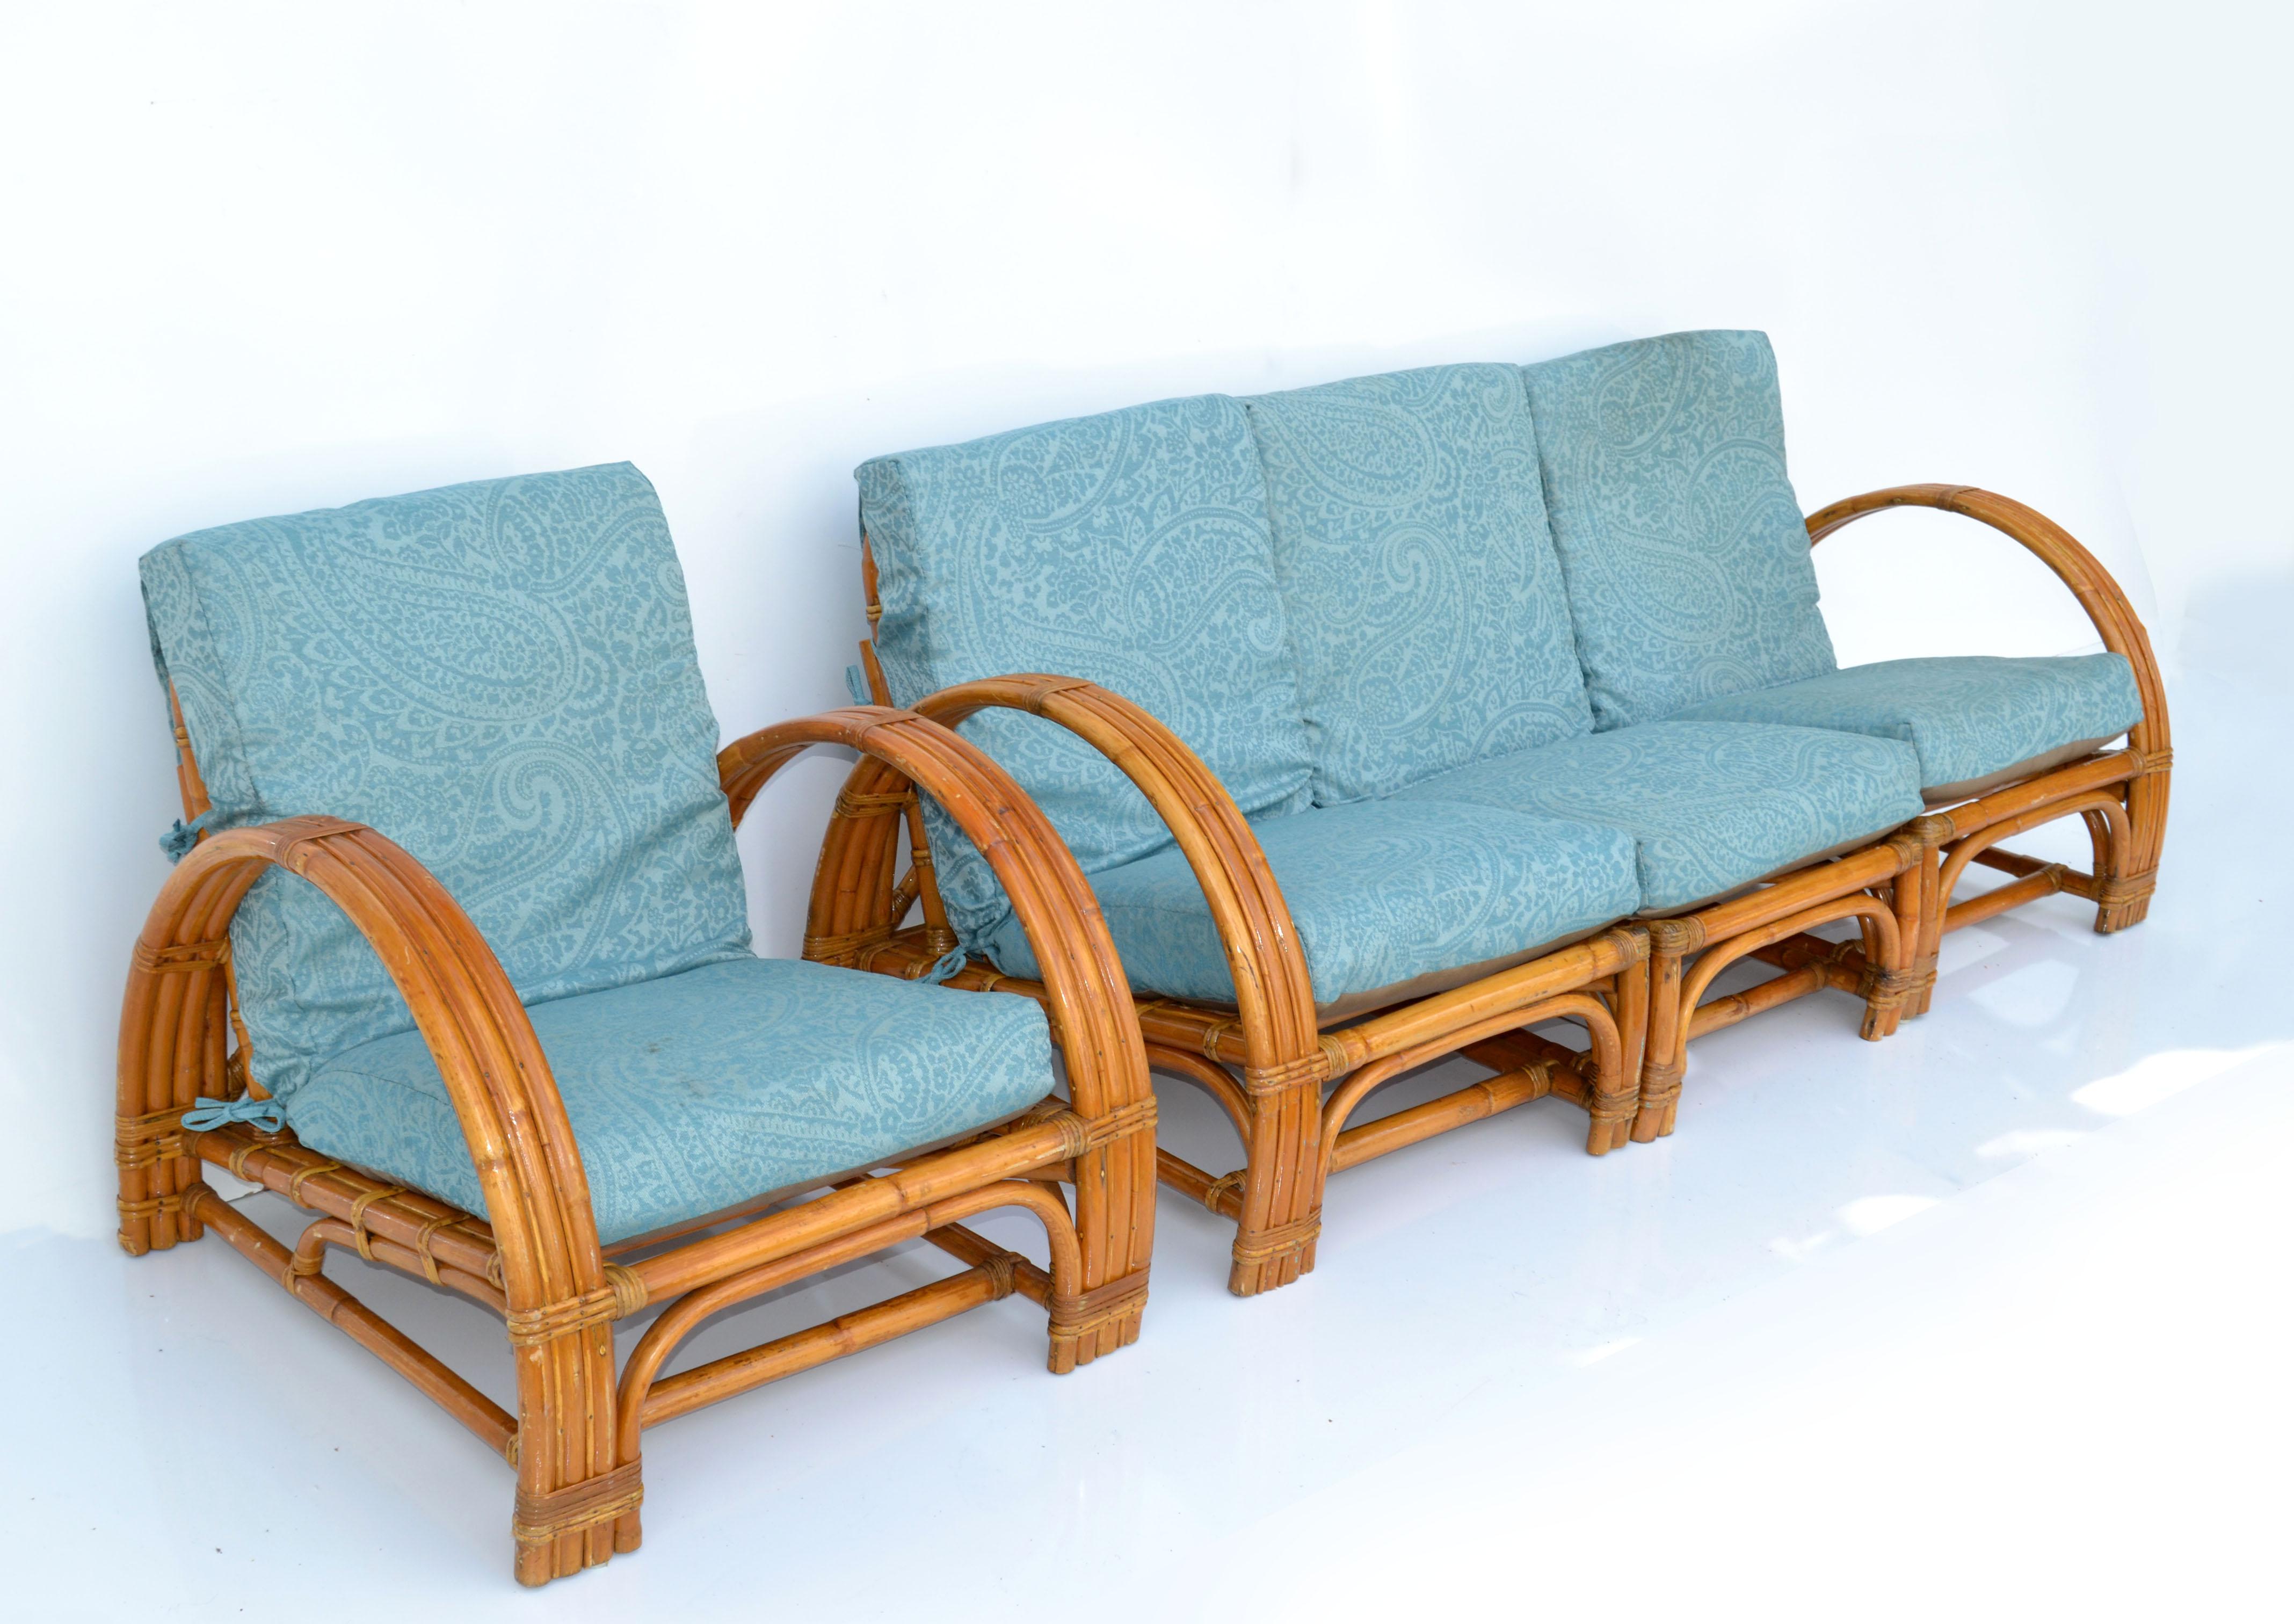 Calif - Asia 4 piece seating set indoor sofa collection Asian Modern made out of handcrafted bamboo and each chair comes with the original Turquoise Seat upholstery by Allen & Roth.
Finished in a warm Brown Color, the sturdy rattan pole